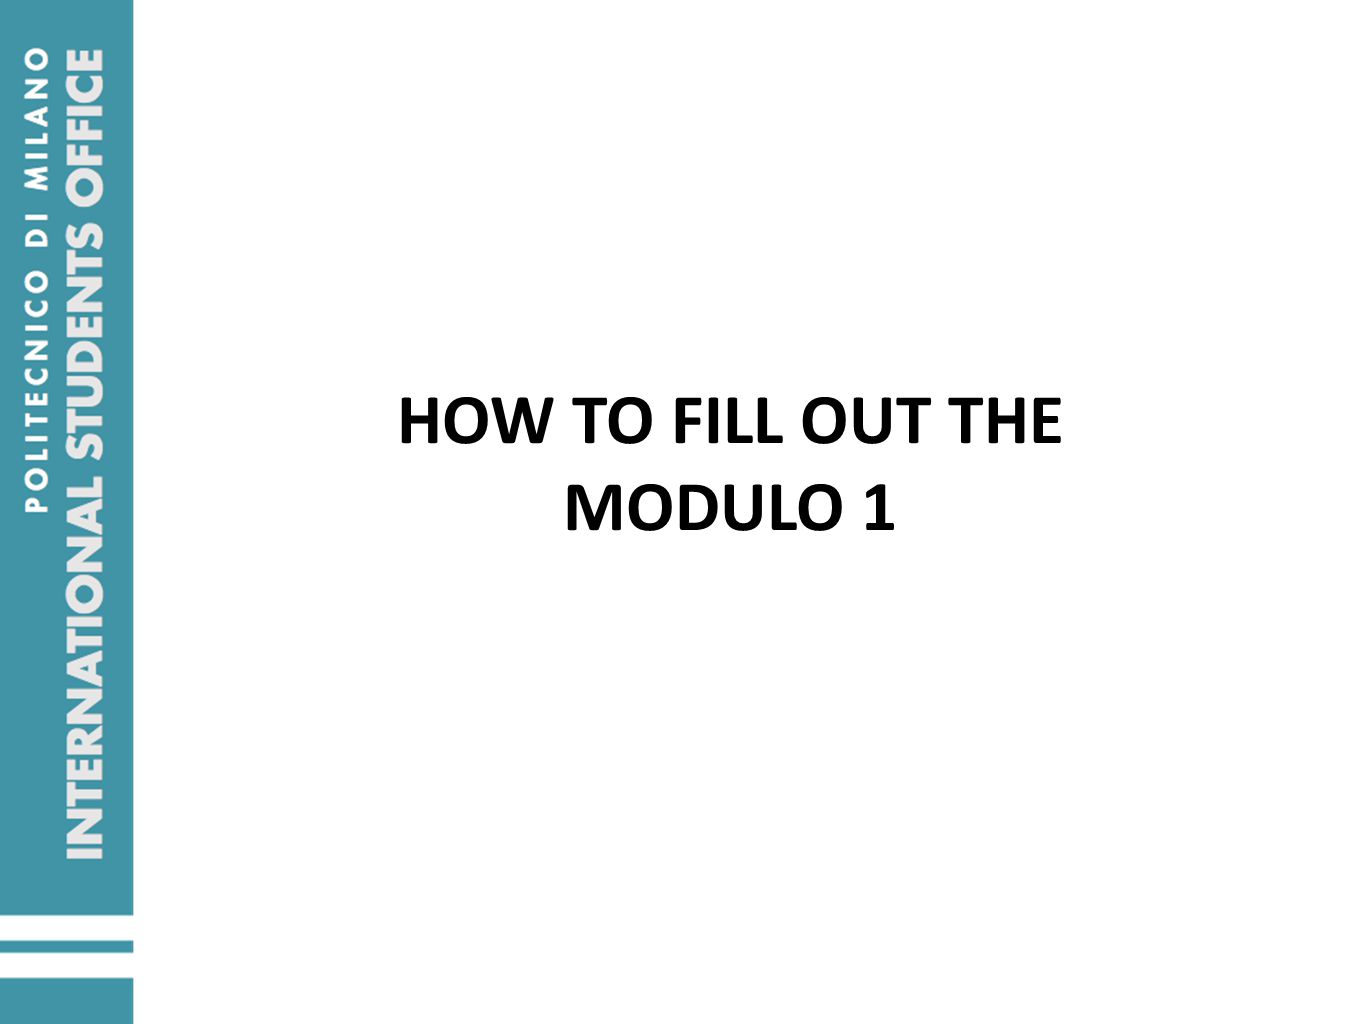 HOW TO FILL OUT THE MODULO 1